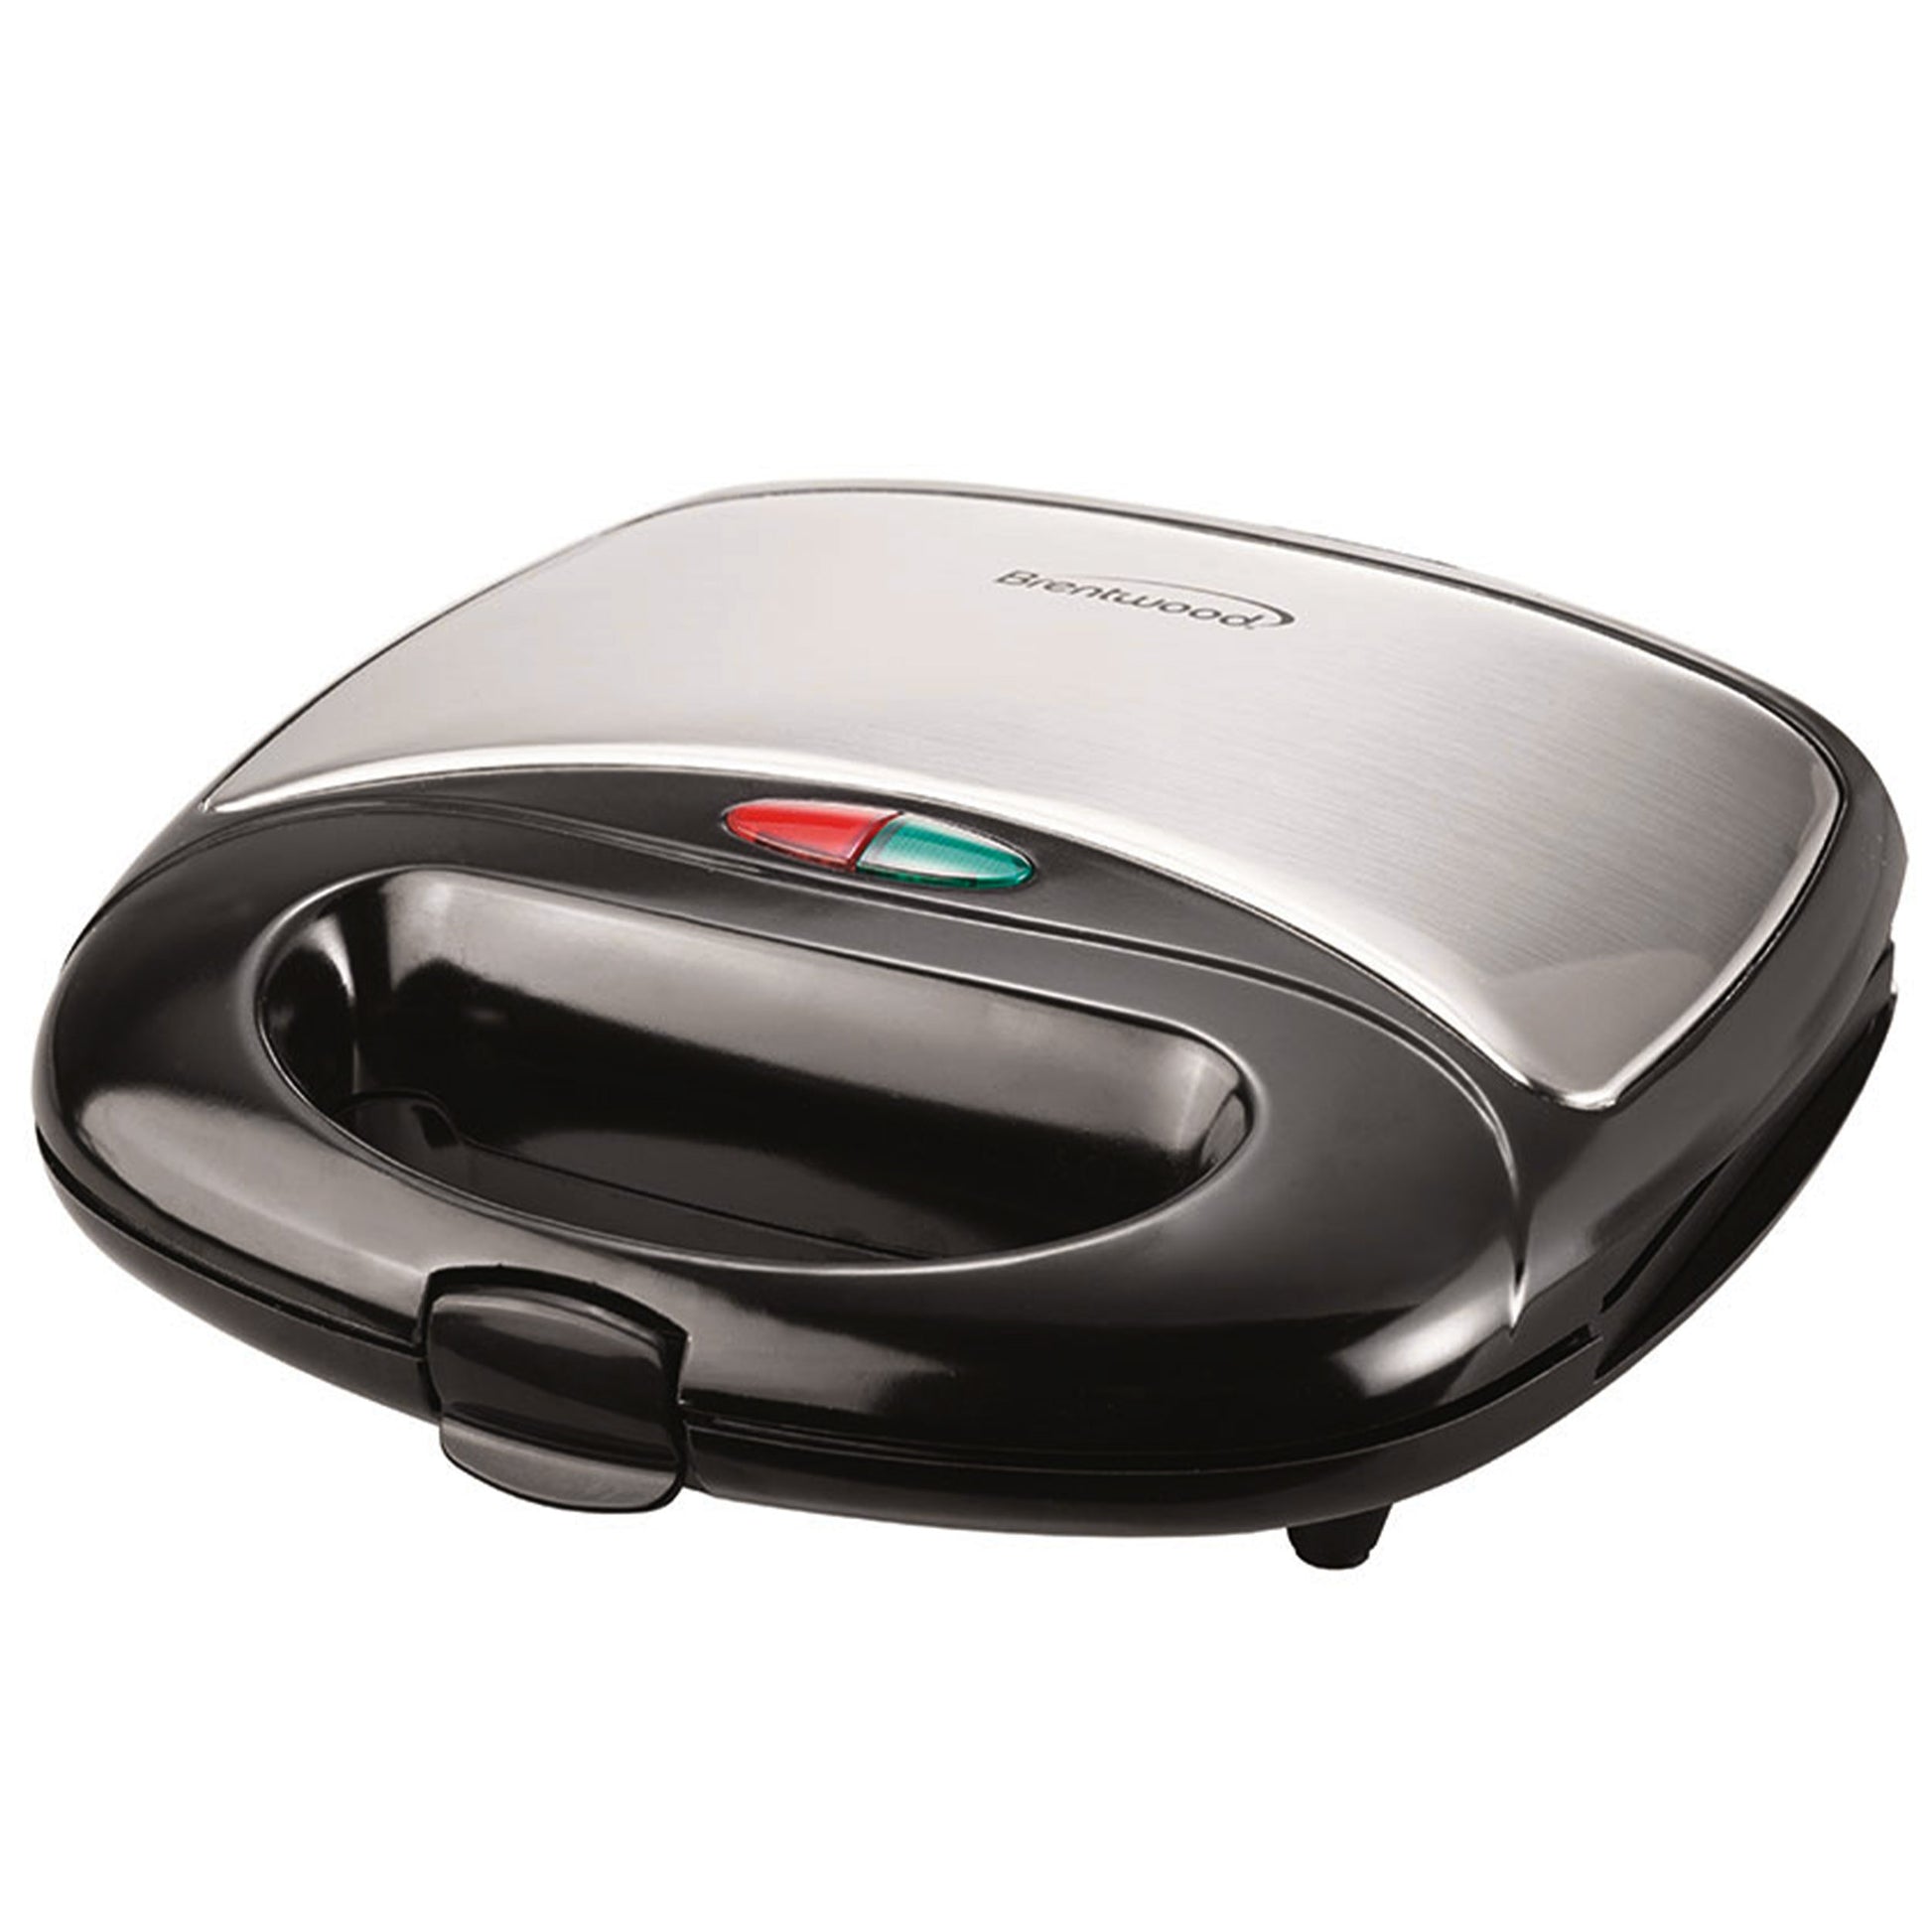 BRENTWOOD Brentwood Waffle Maker in Black